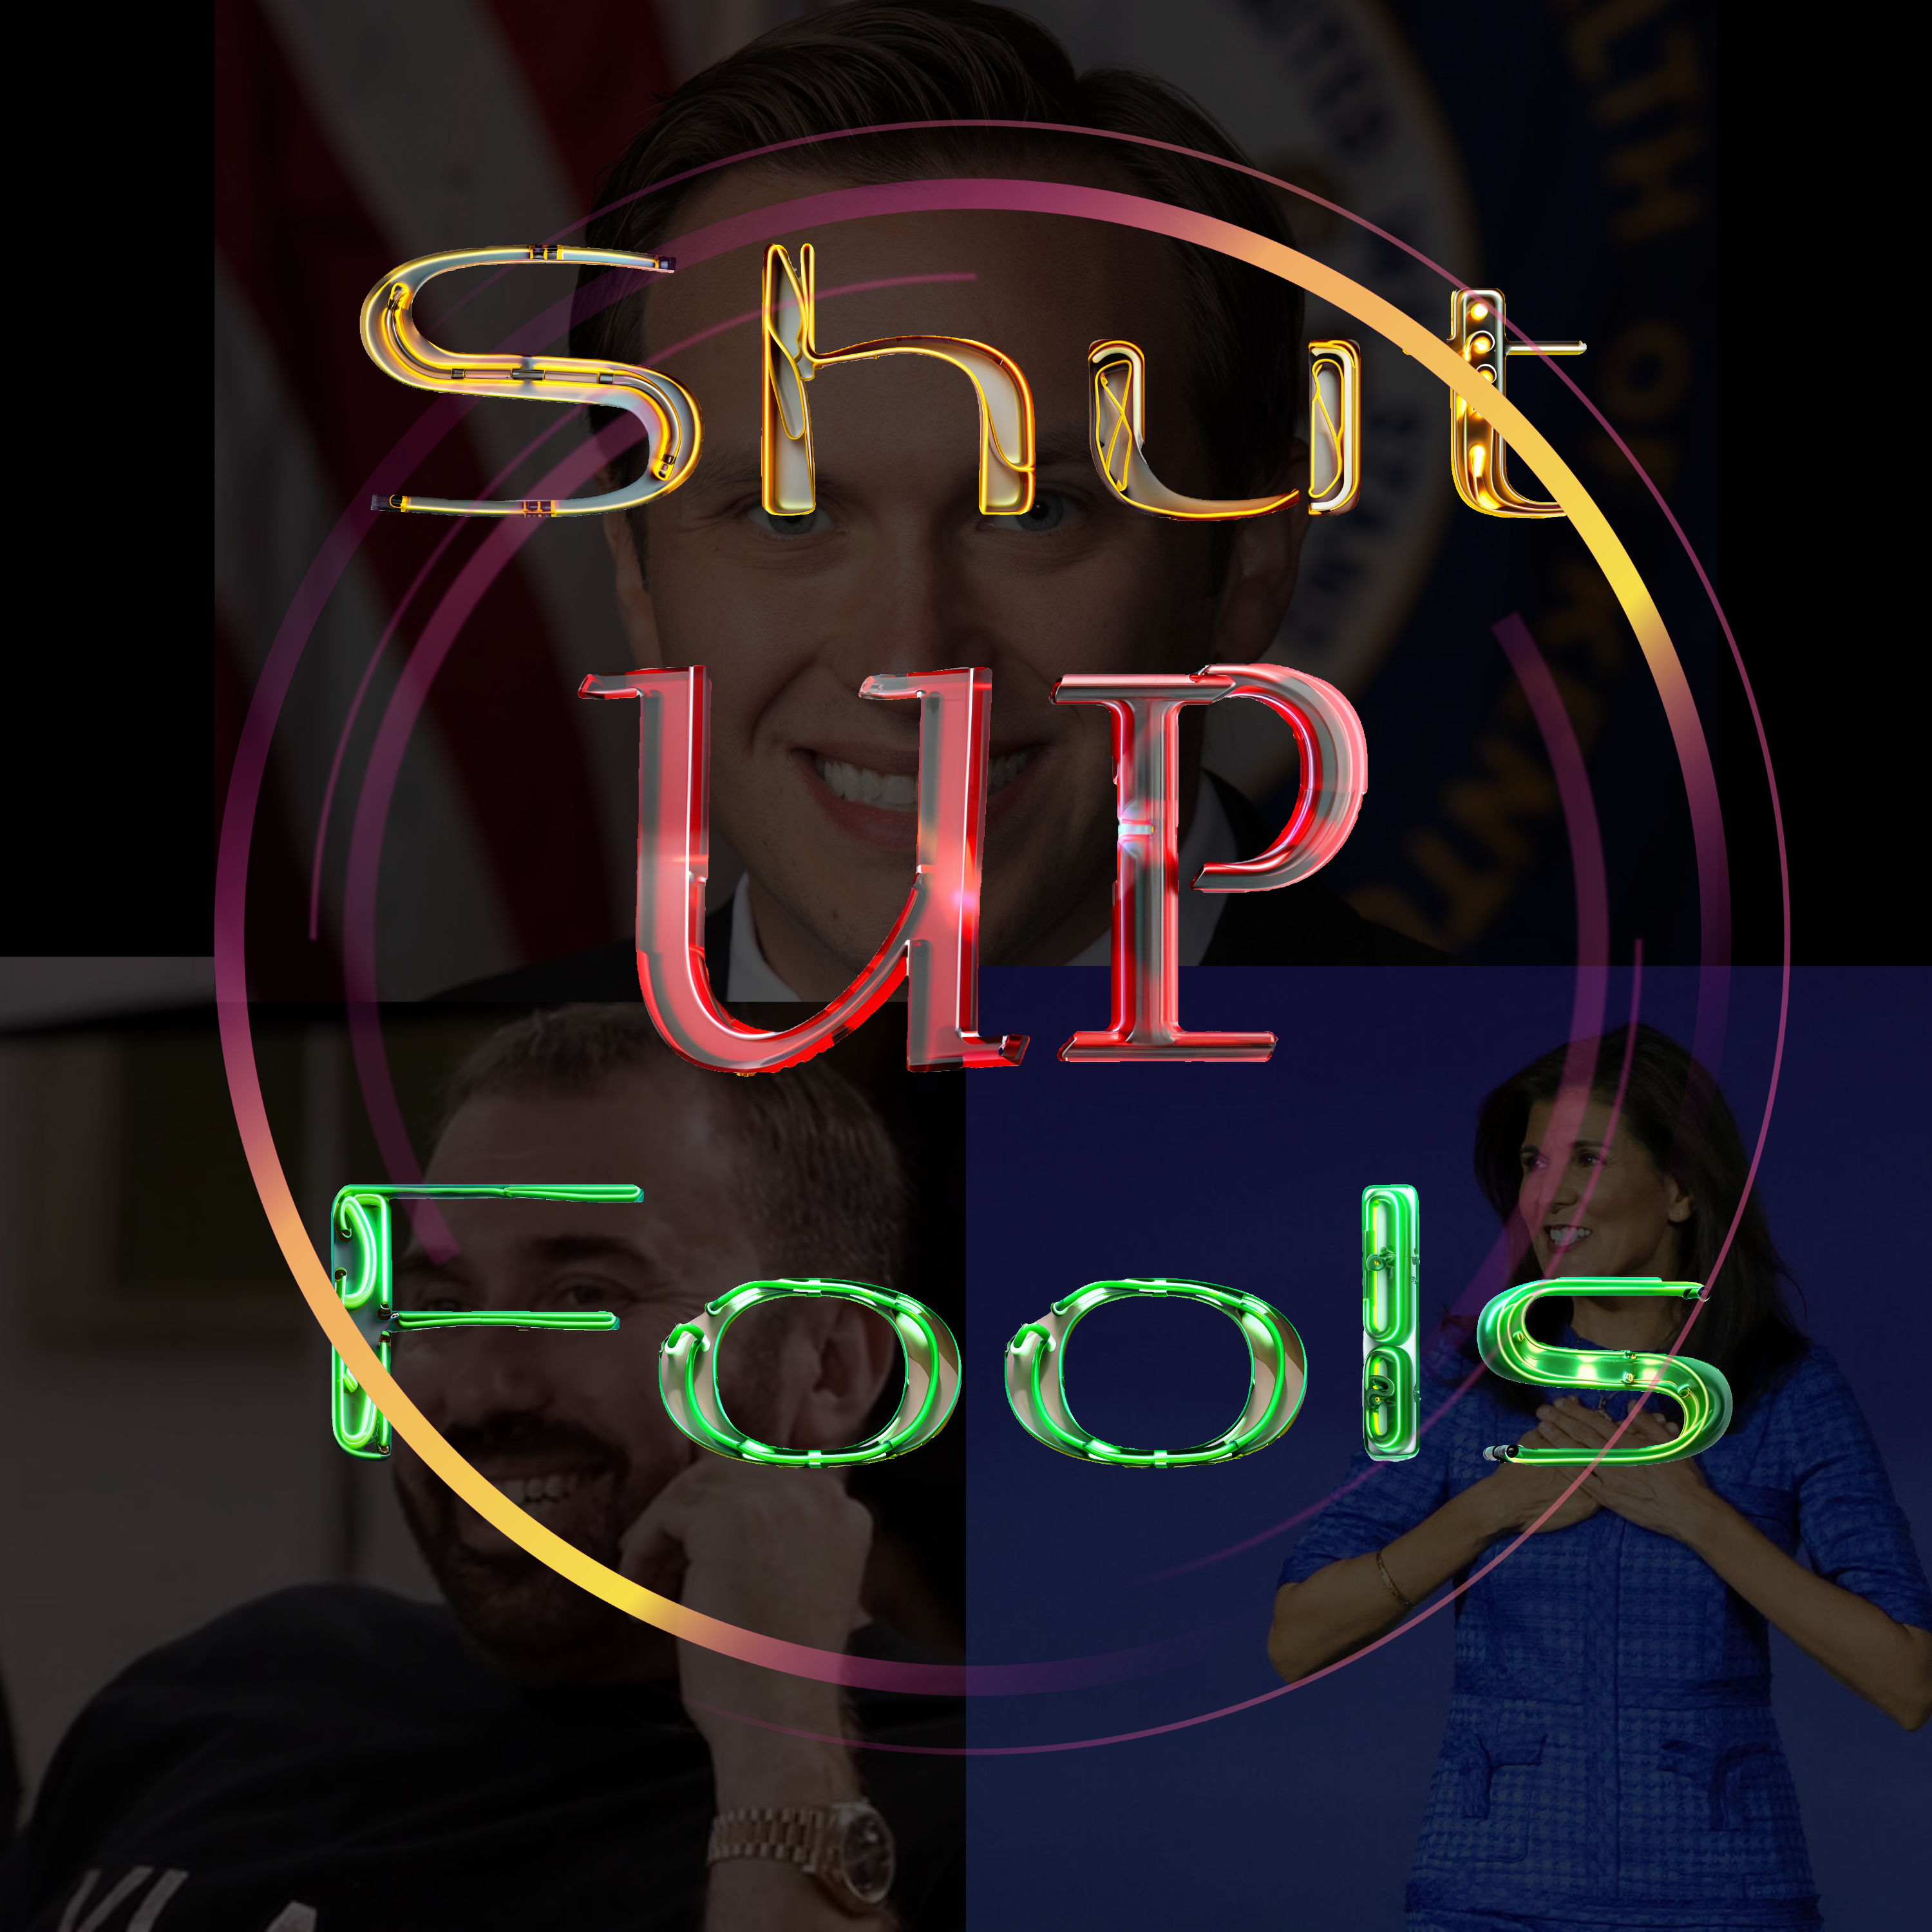 Shut Up Fool 1.20.24 “Mistakes: Nick Wilson’s Incest Gaffe, Nikki Haley’s Nonracist America, and DJ Vlad’s Thoughts on Black Millionaires”